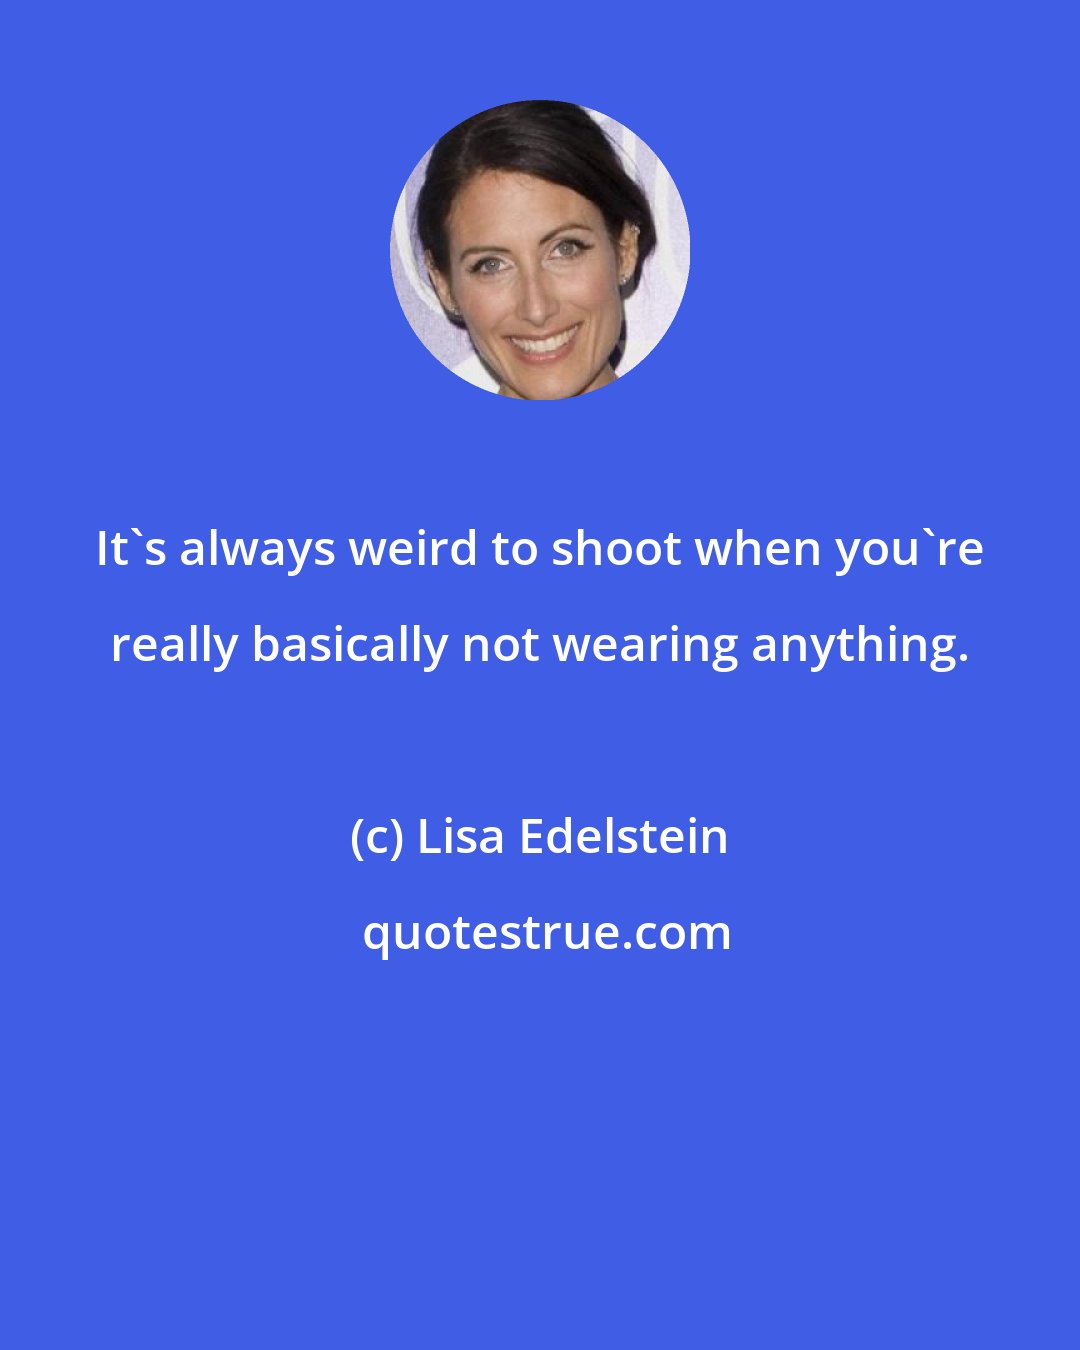 Lisa Edelstein: It's always weird to shoot when you're really basically not wearing anything.